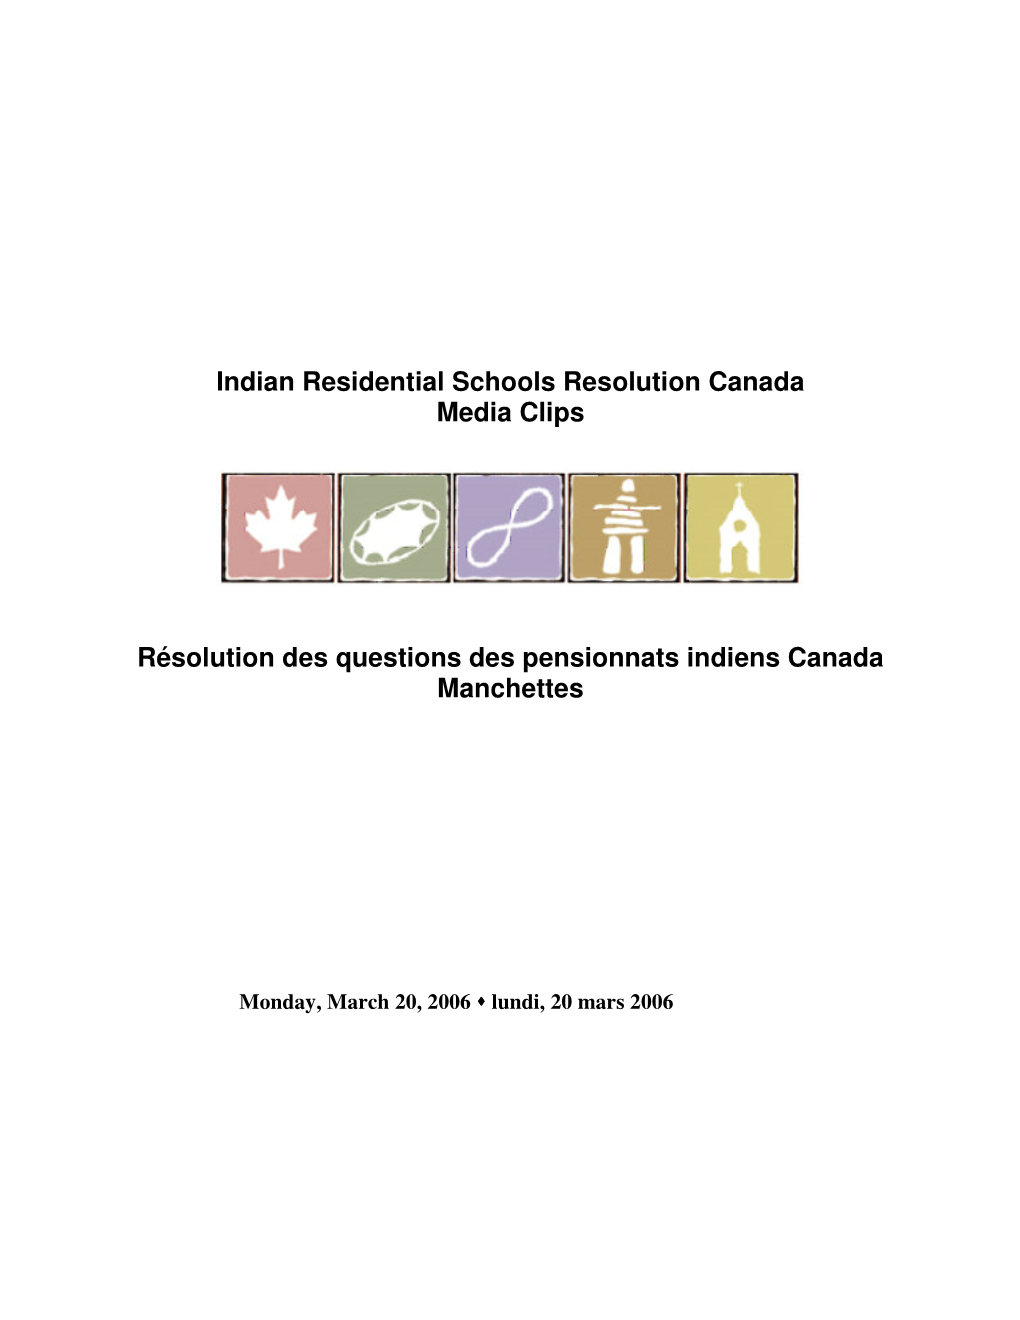 Indian Residential Schools Resolution Canada Media Clips